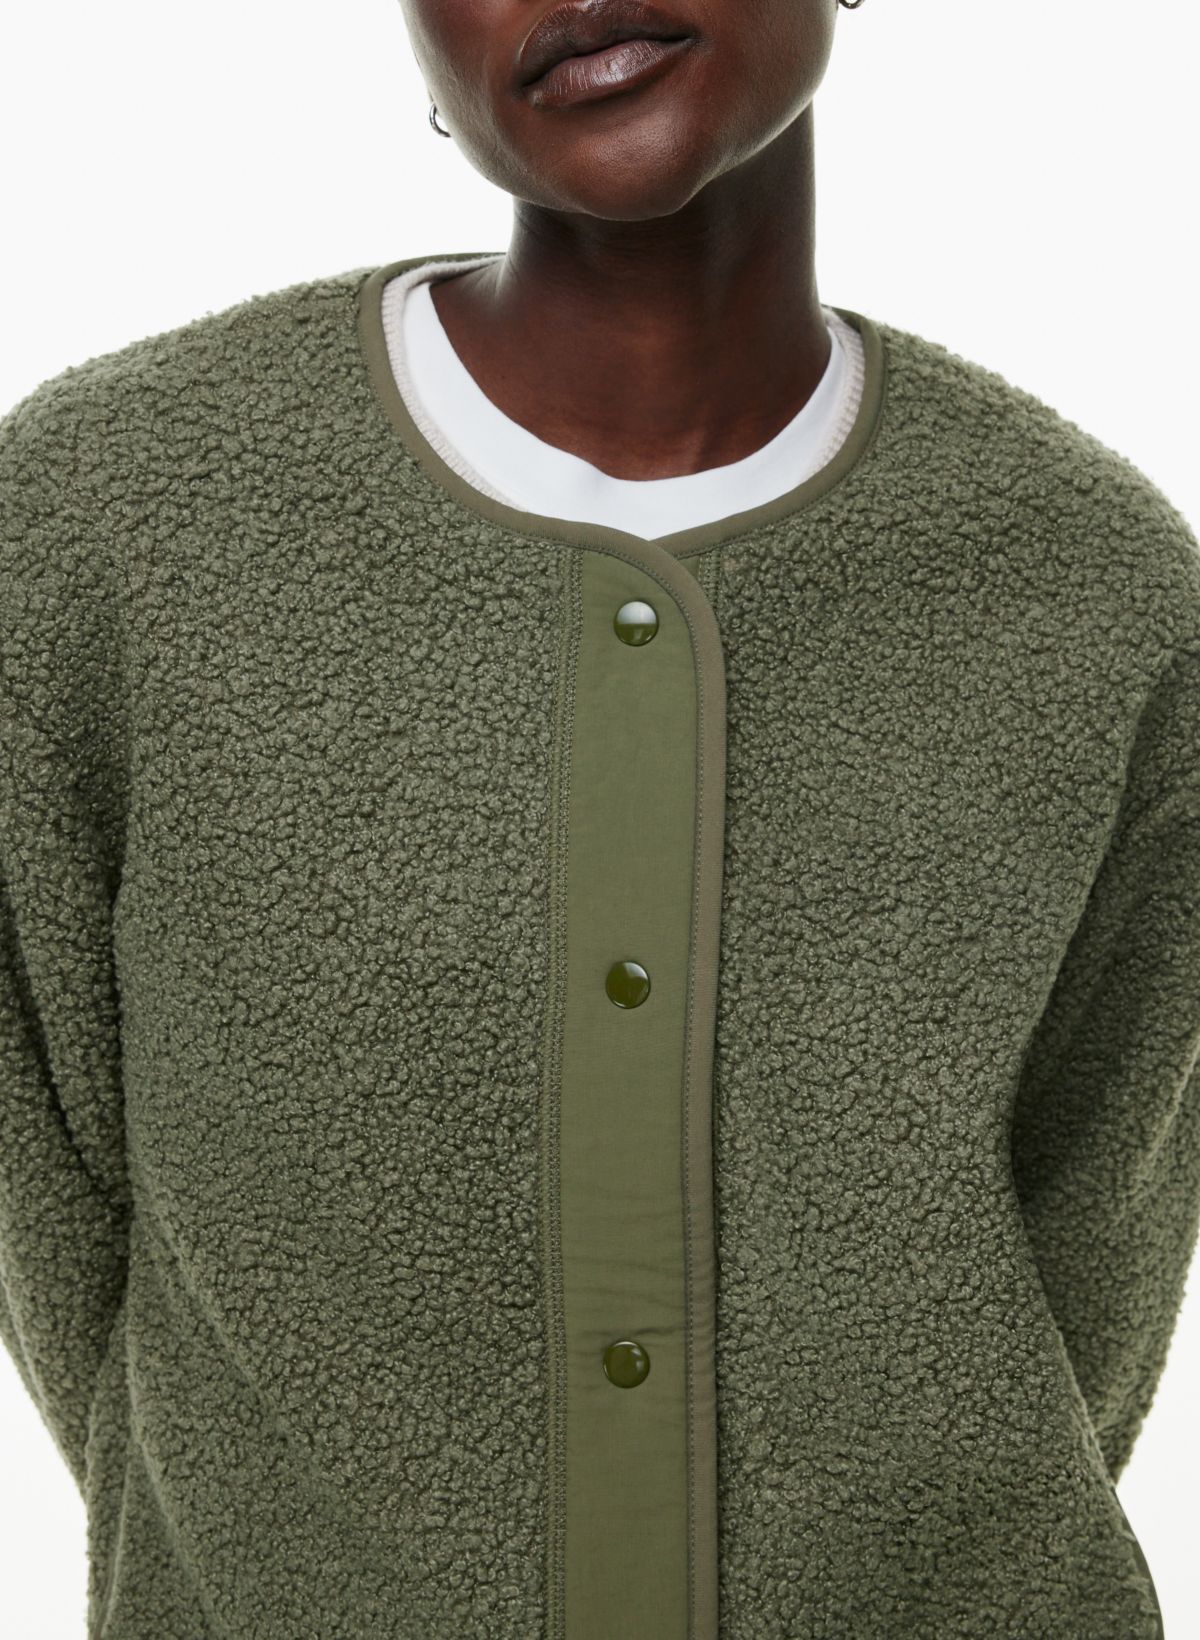 Wilfred Free Women's Sherpa Liner Jacket in Army Green Size Large